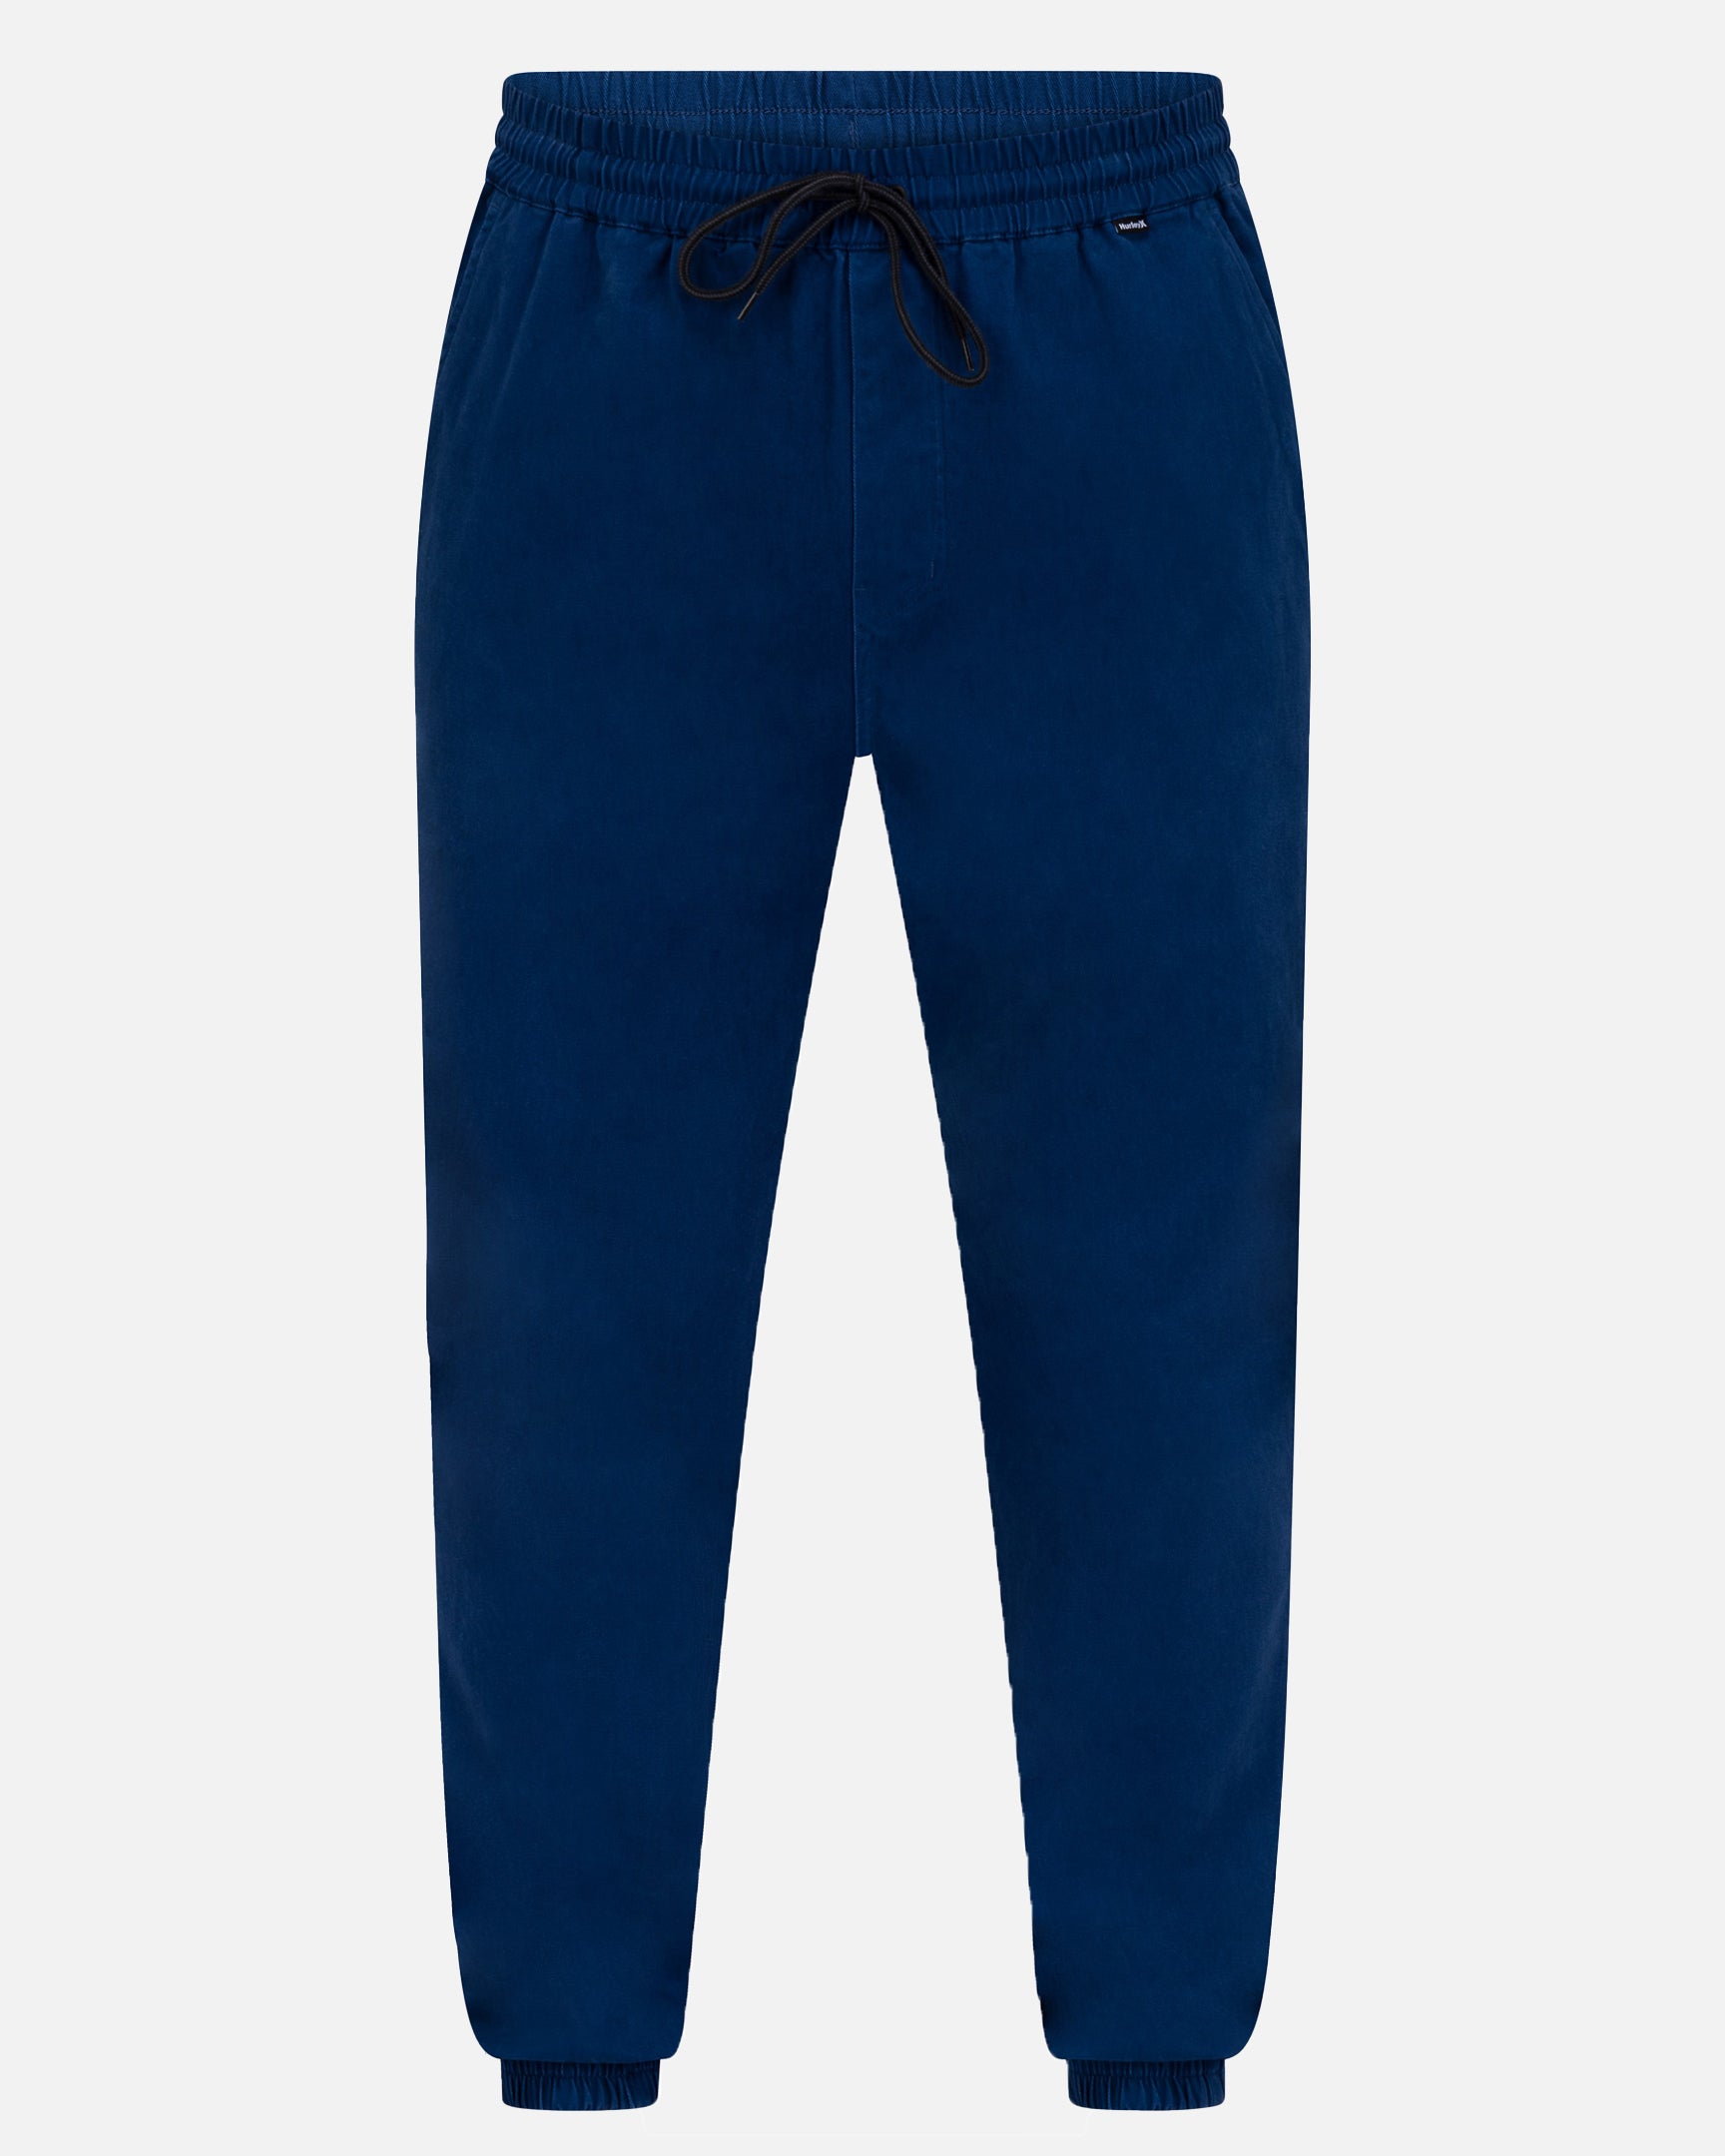 Blue - Natural Relaxed Fit Cotton Fleece Jogger